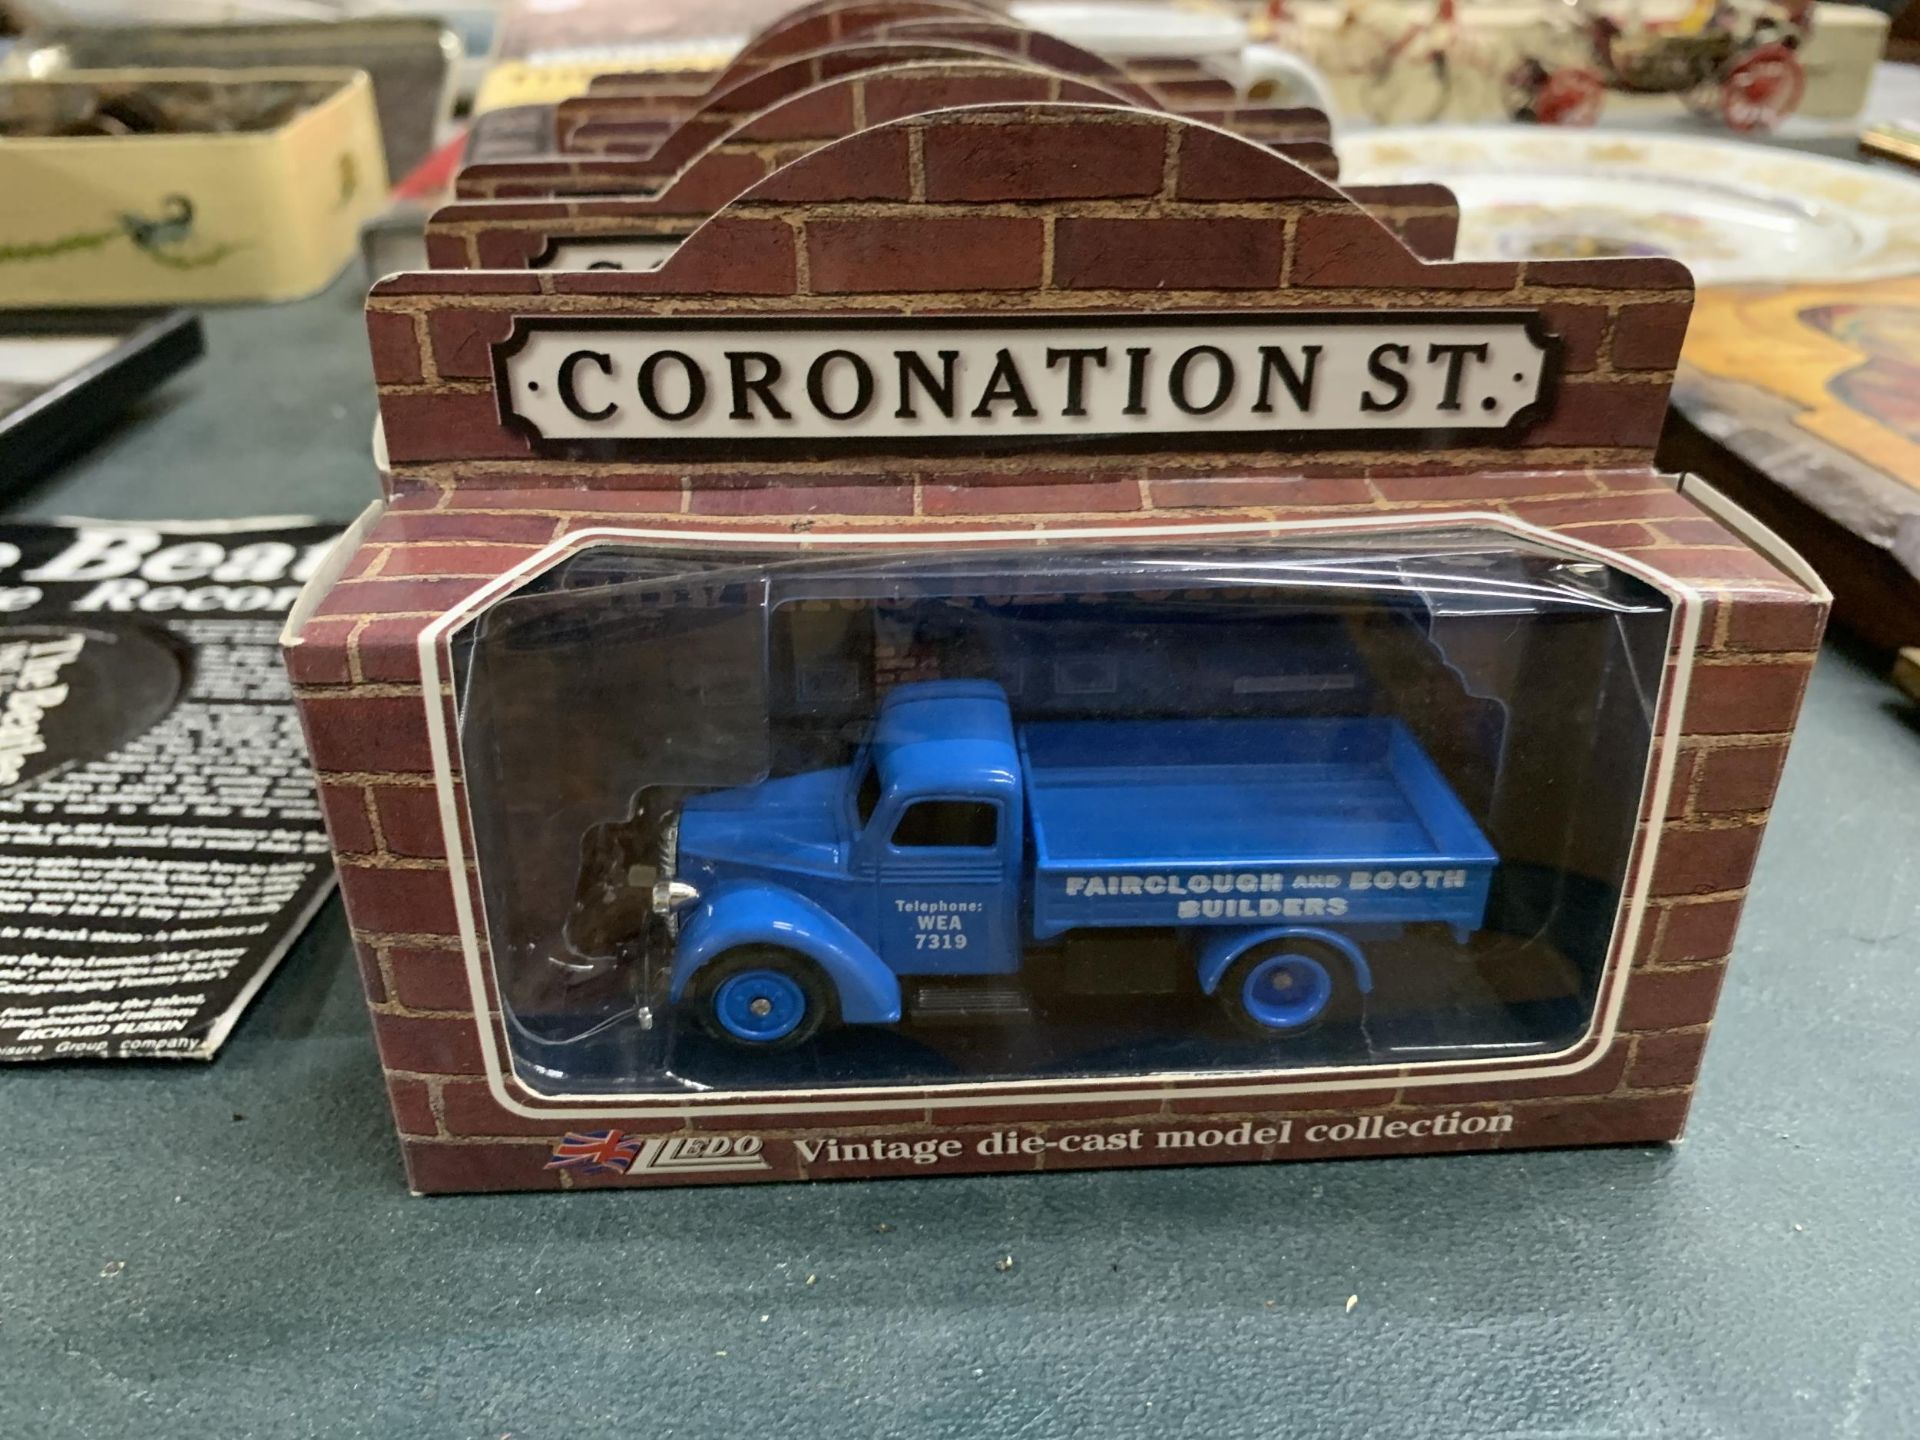 A COLLECTION OF 'CORONATION STREET' ITEMS TO INCLUDE SIX MODEL VEHICLES - BOXED, TWO BOOKS AND A MUG - Image 2 of 6